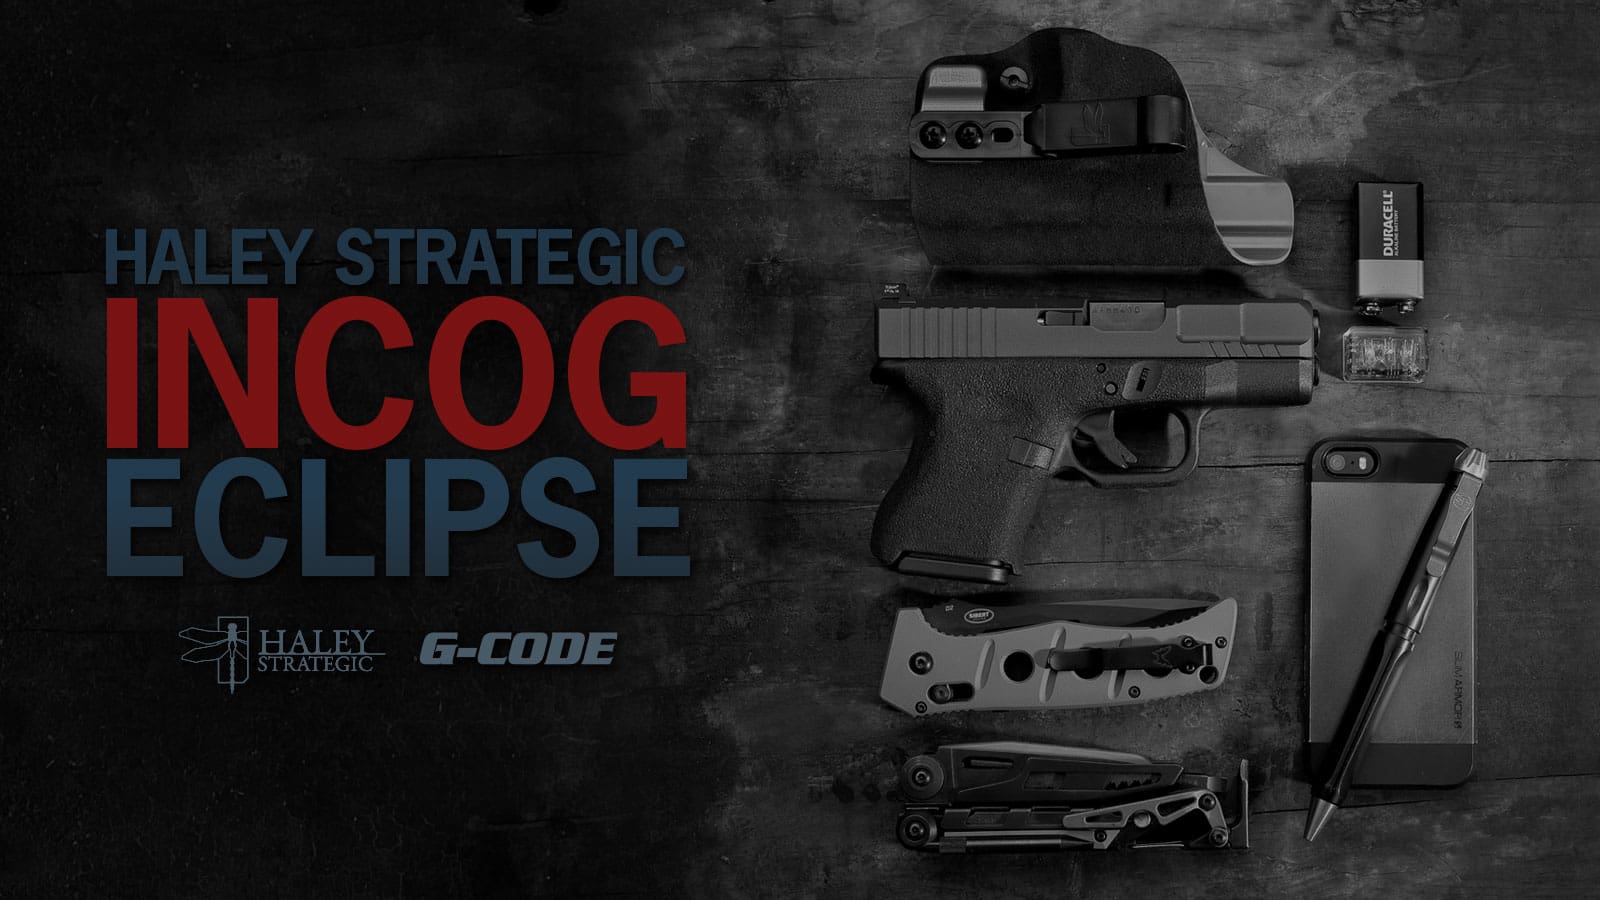 G-Code / Haley Strategic – INCOG Eclipse - Soldier Systems Daily